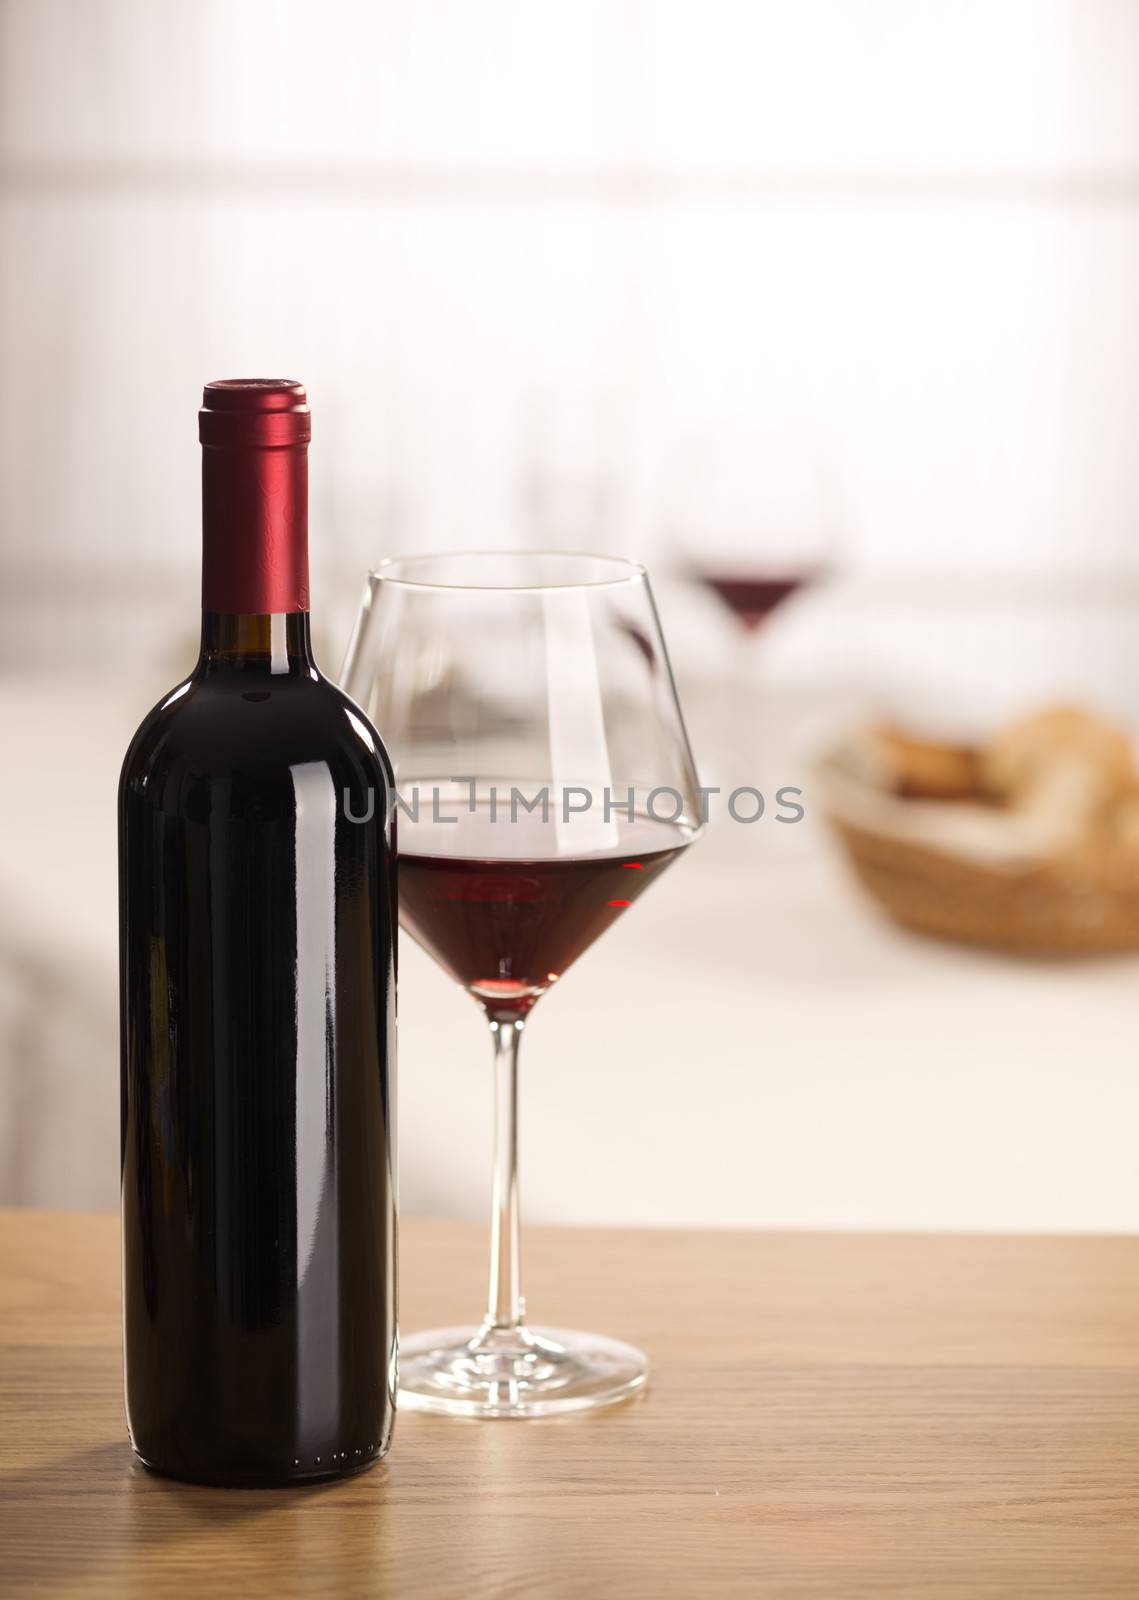 Red wine glass and bottle still life at restaurant.